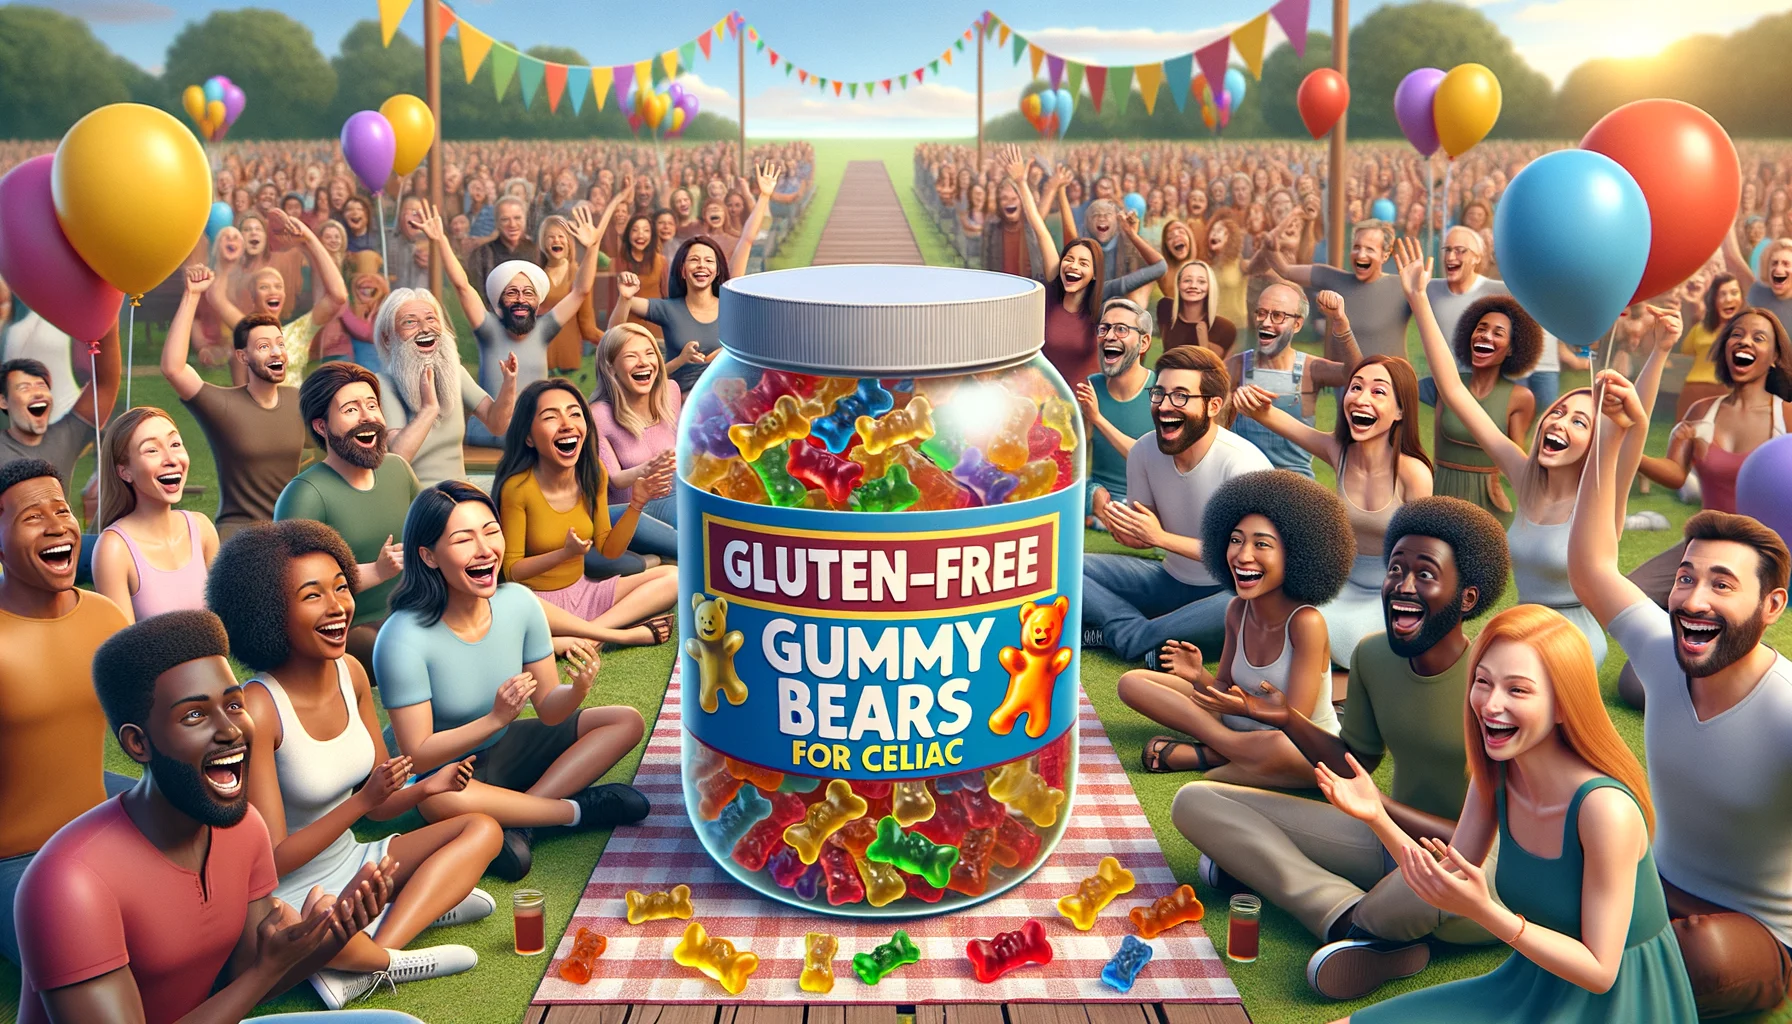 Imagine an amusing, realistic scene filled with joy and laughter. In the center of the view, capture a diverse group of happy people of different descents like Caucasian, Hispanic, Middle-Eastern, Black, and South Asian each successively opening a large, vibrantly colored jar labeled 'Gluten-Free Gummy Bears for Celiac'. Their faces should express delight and satisfaction, highlighting the perfectness of the product for those who are gluten intolerant. The setting should be a lively outdoor picnic with multi-colored balloons and cheerful decorations, under a splendidly sunny blue sky.